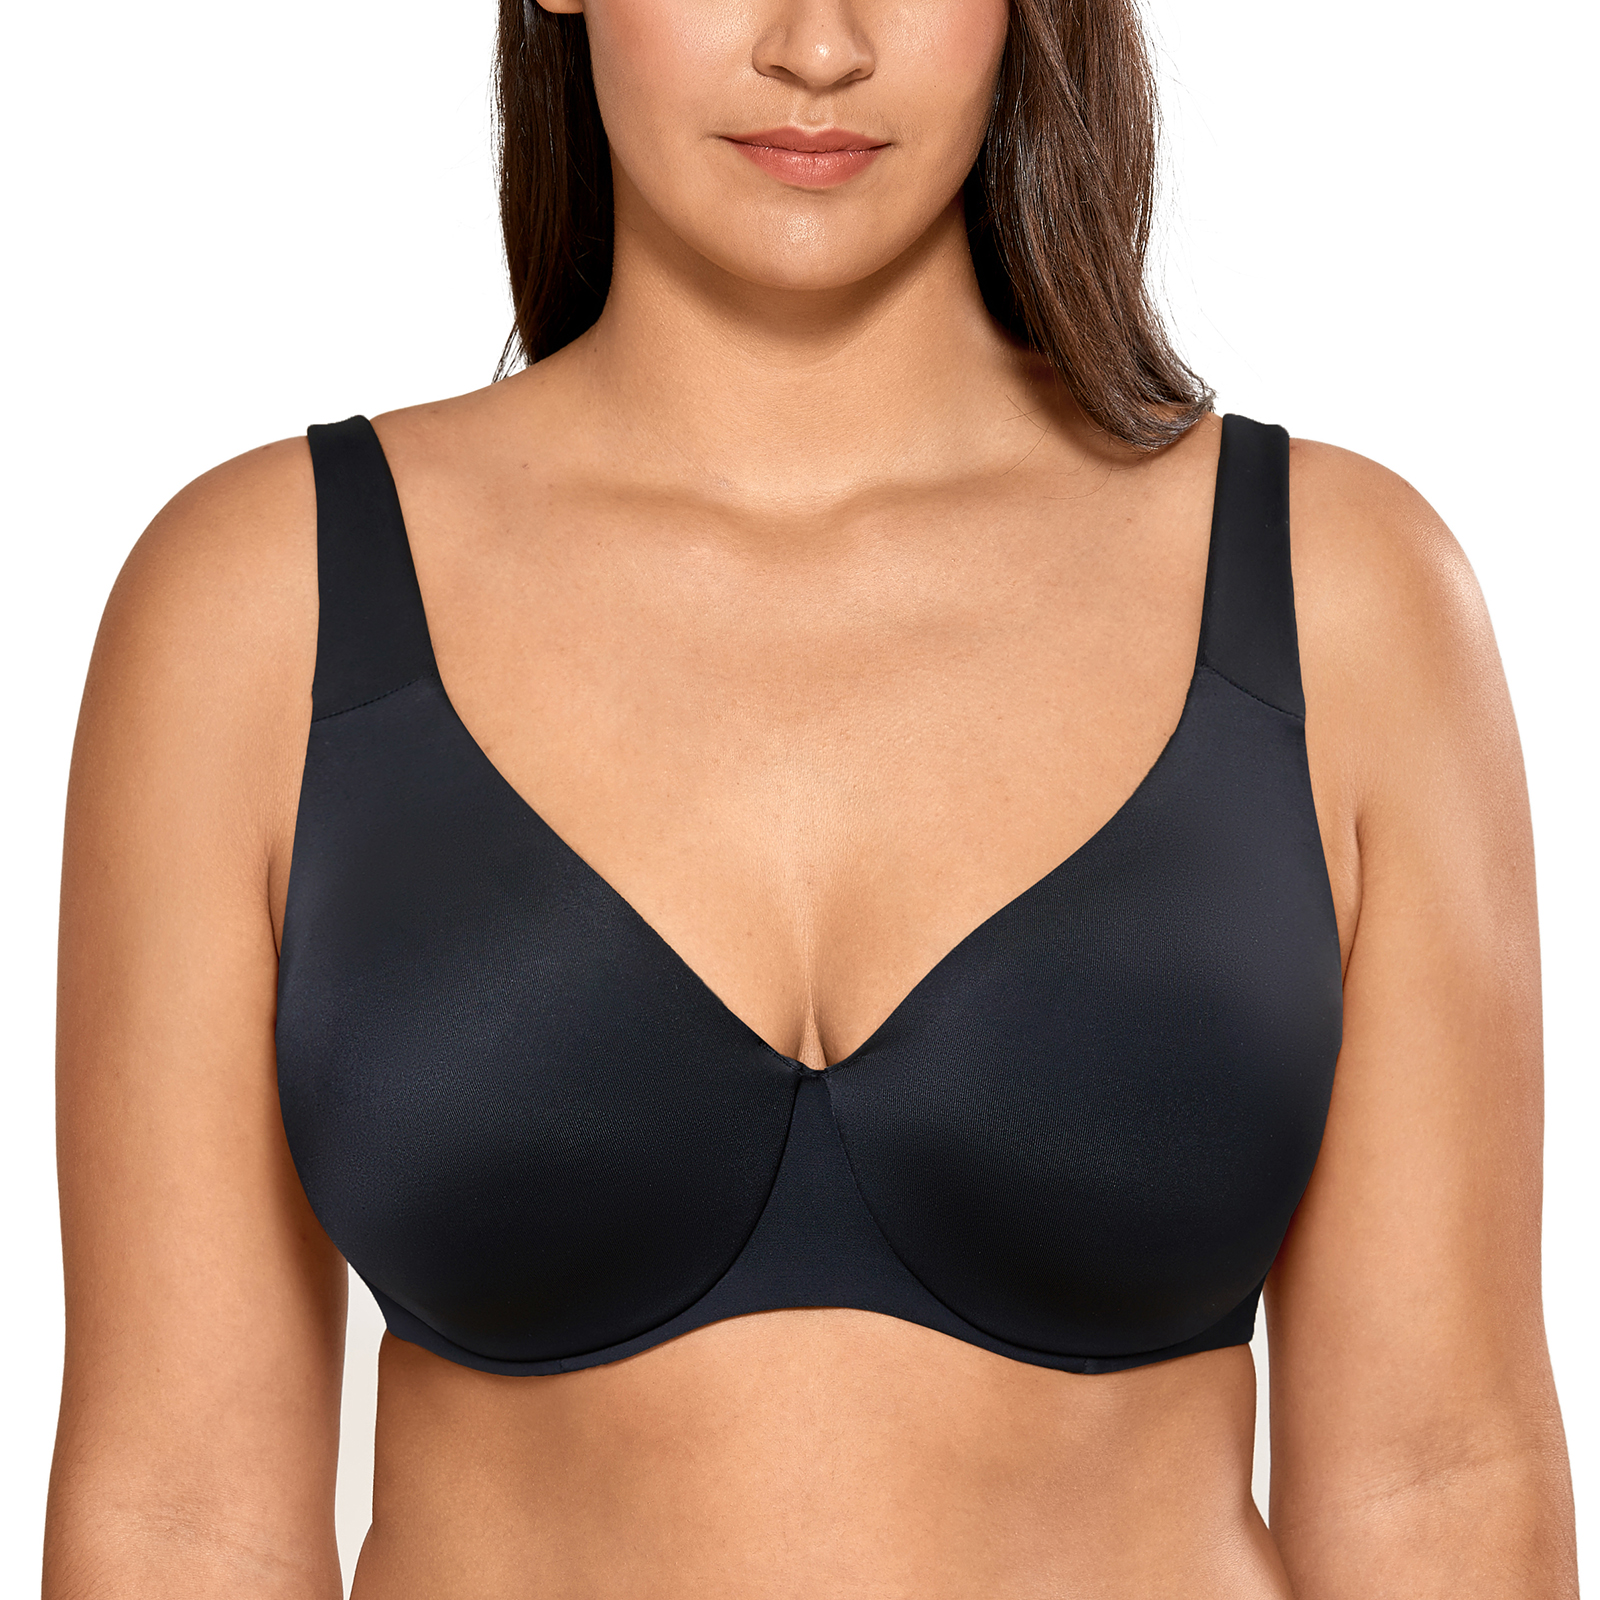 Aisilin Womens Minimizer Bra Plus Size Unlined Full Coverage Smooth Underwire Ebay